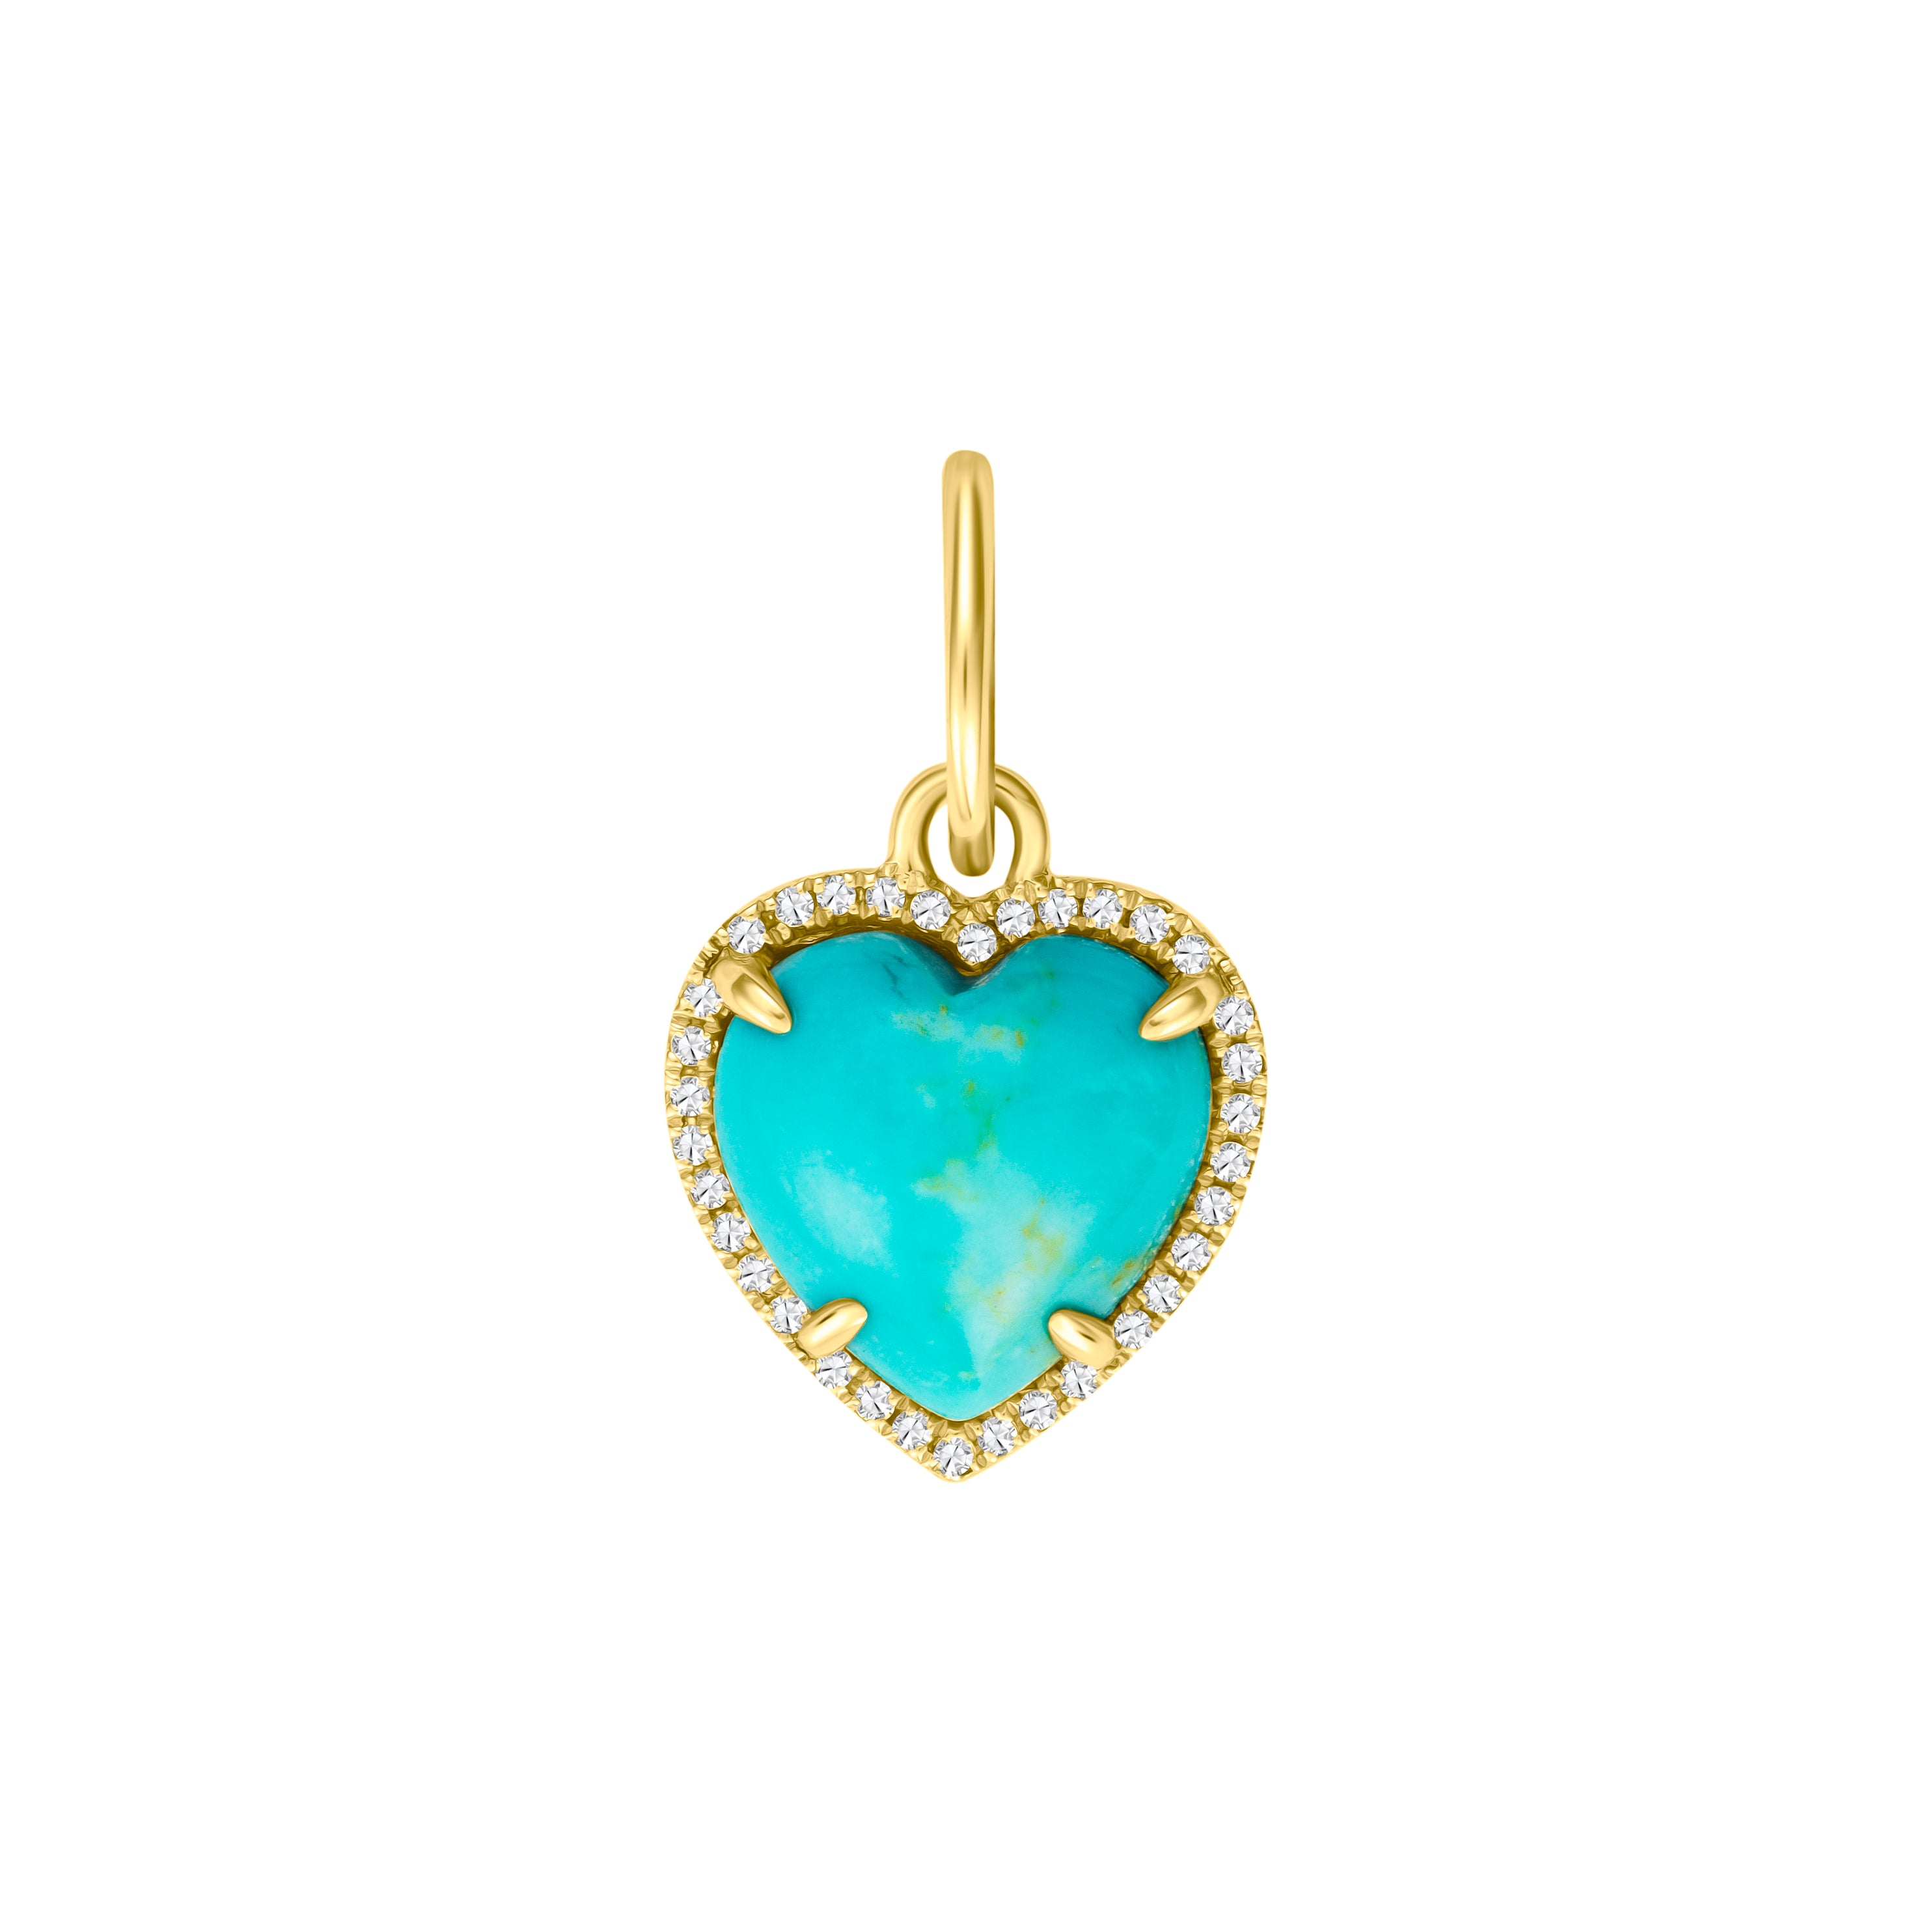 Diamond and Turquoise Small Heart Charm